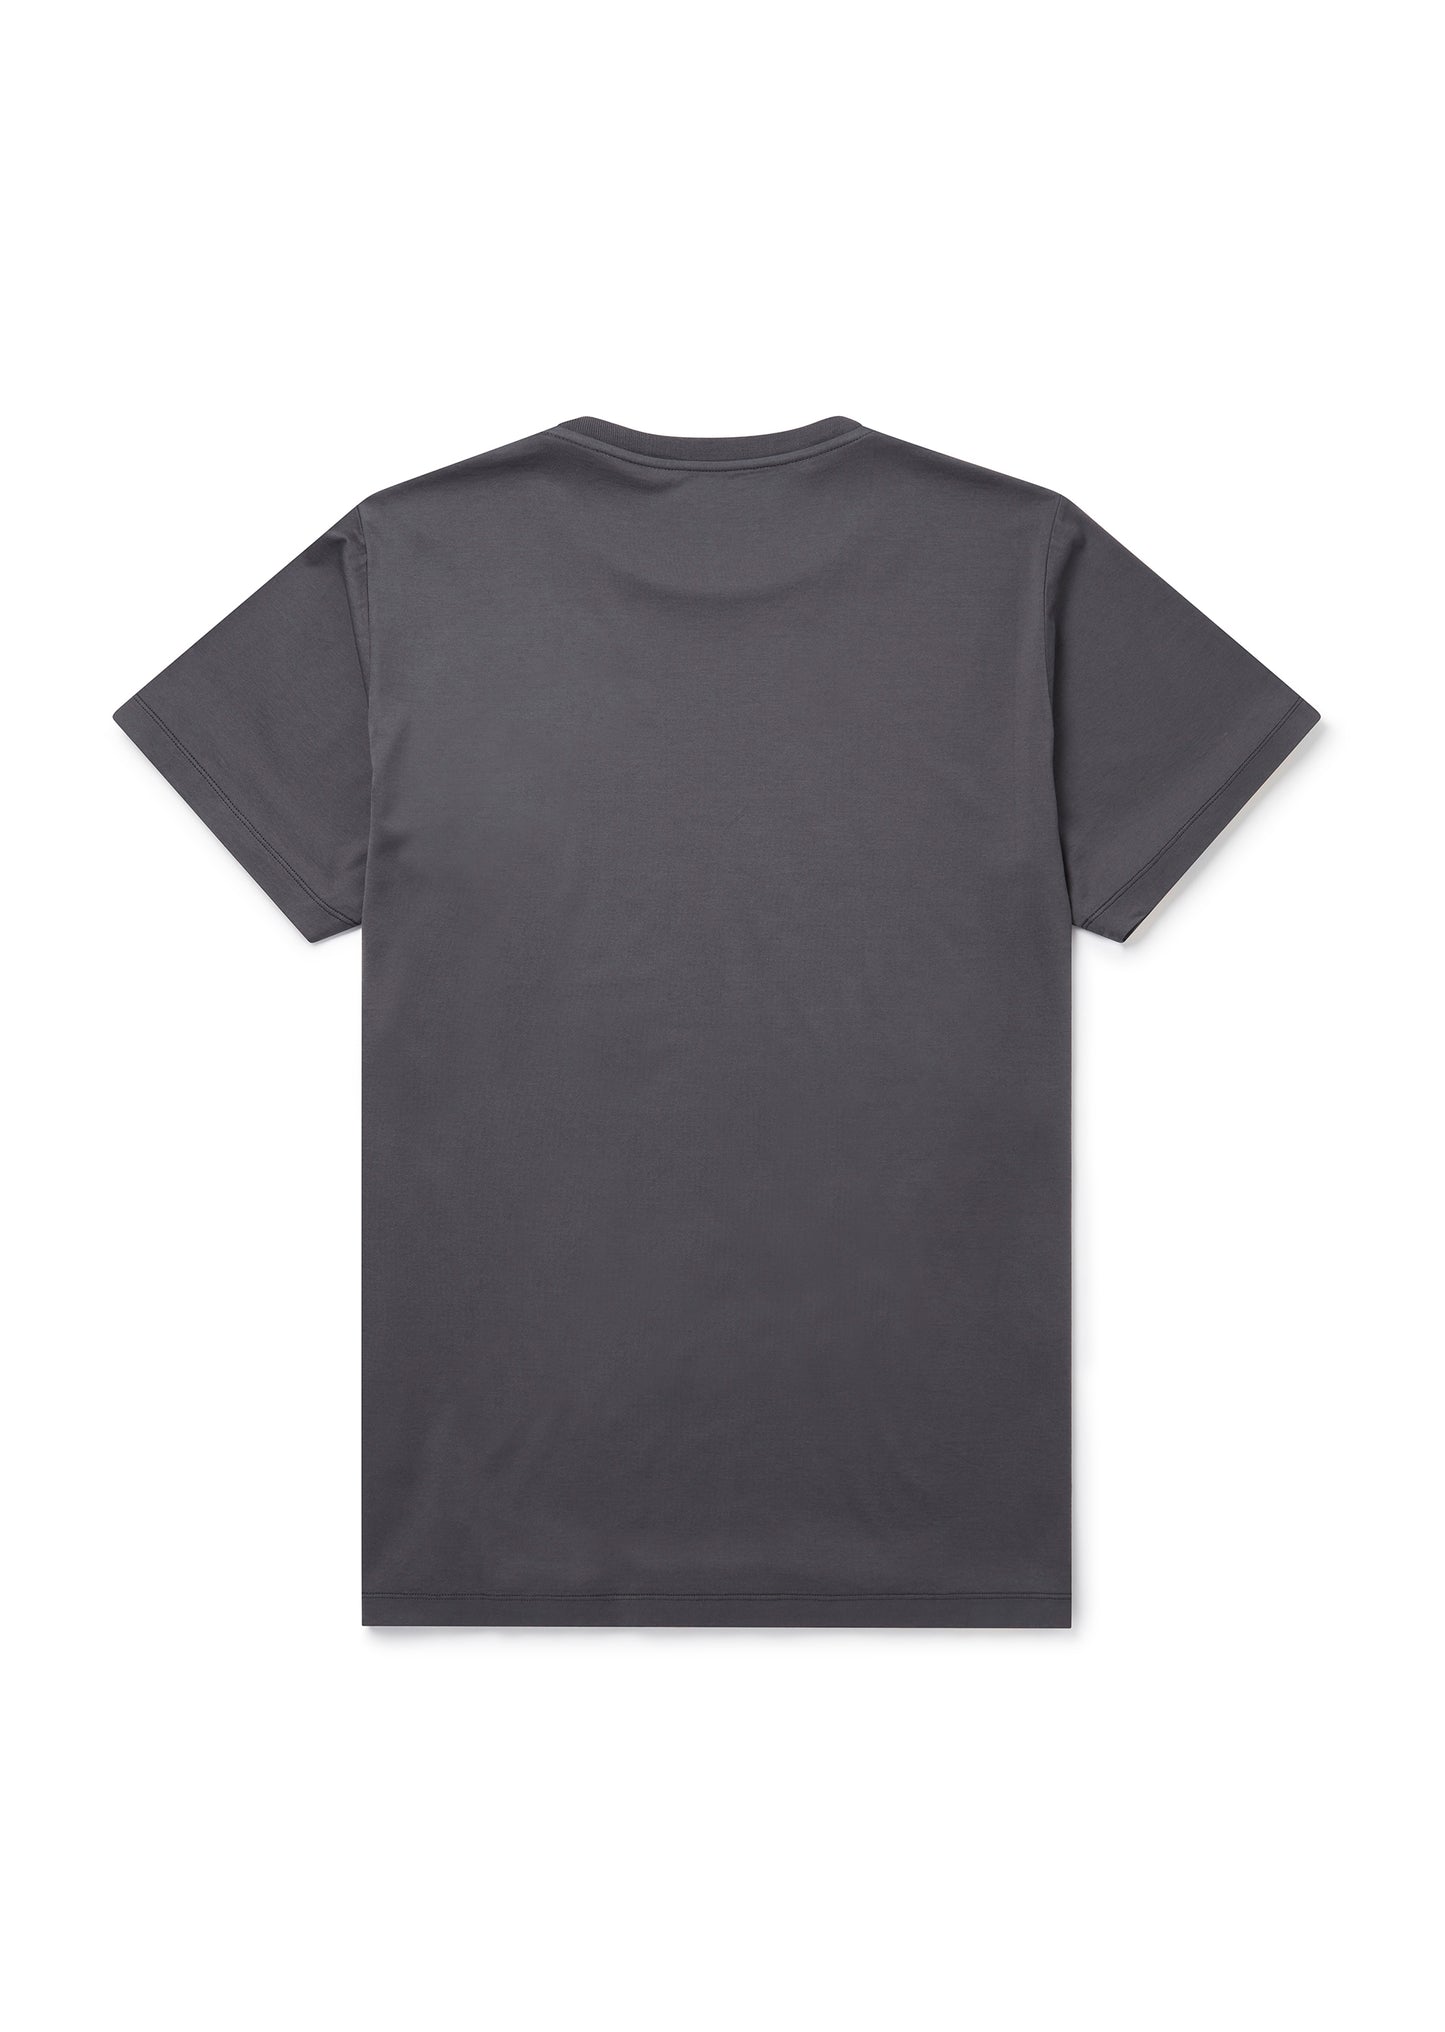 Classic T-Shirt in Charcoal